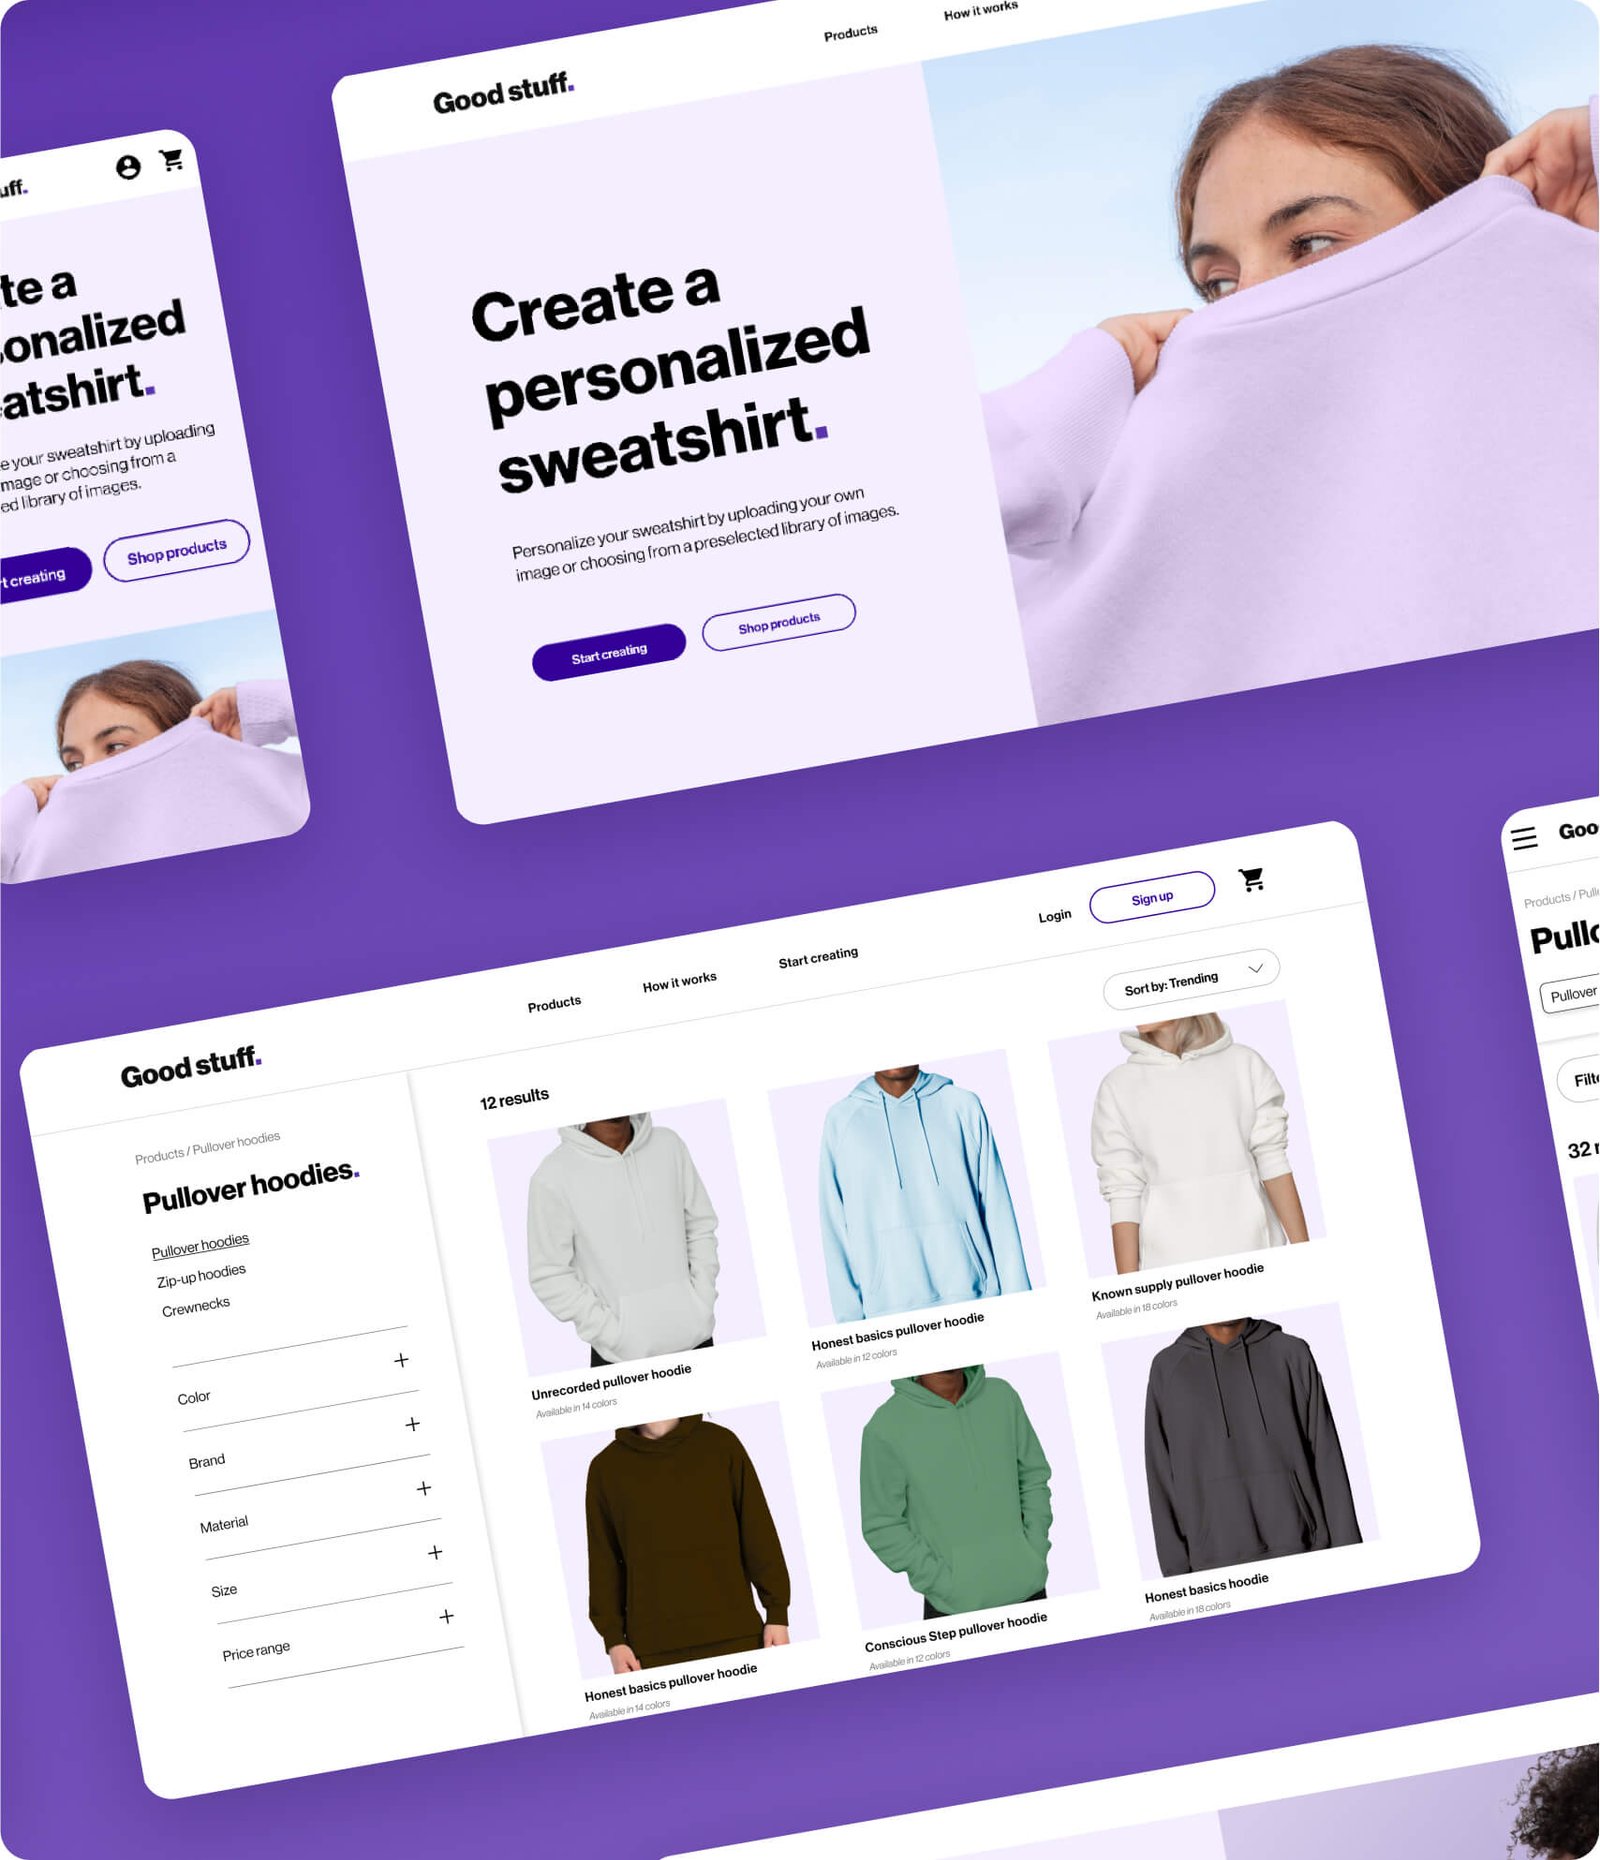 Good stuff is a responsive website that allows online shoppers to select and customize sweatshirts